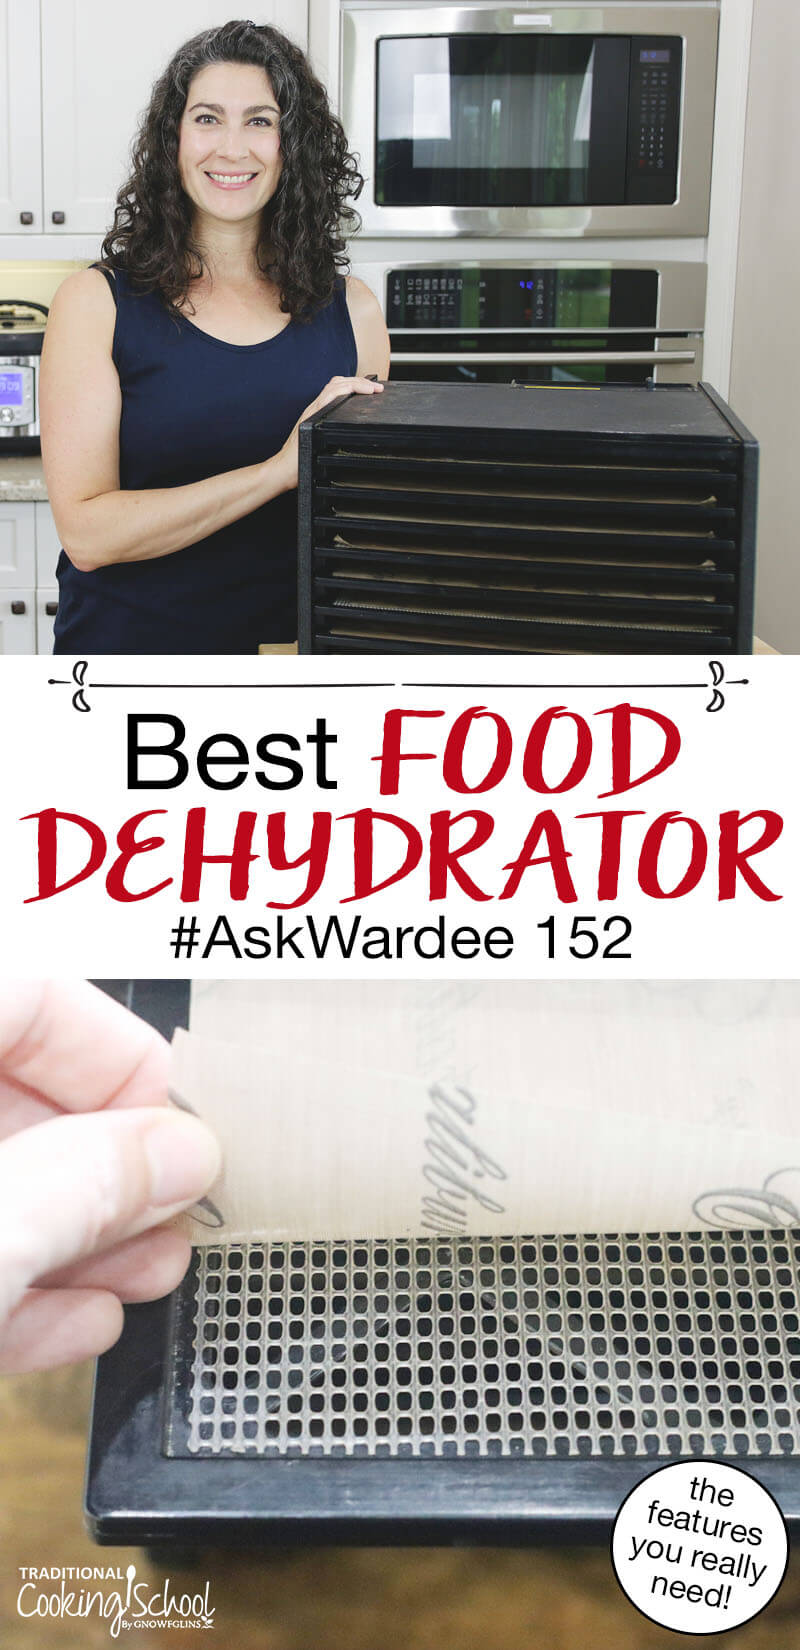 photo collage of a smiling woman in her kitchen next to a 9-tray vertical dehydrator, and her hand peeling back the dehydrator liner to show the tray underneath. Text overlay: "Best Food Dehydrator #AskWardee 152 (the features you really need!)"